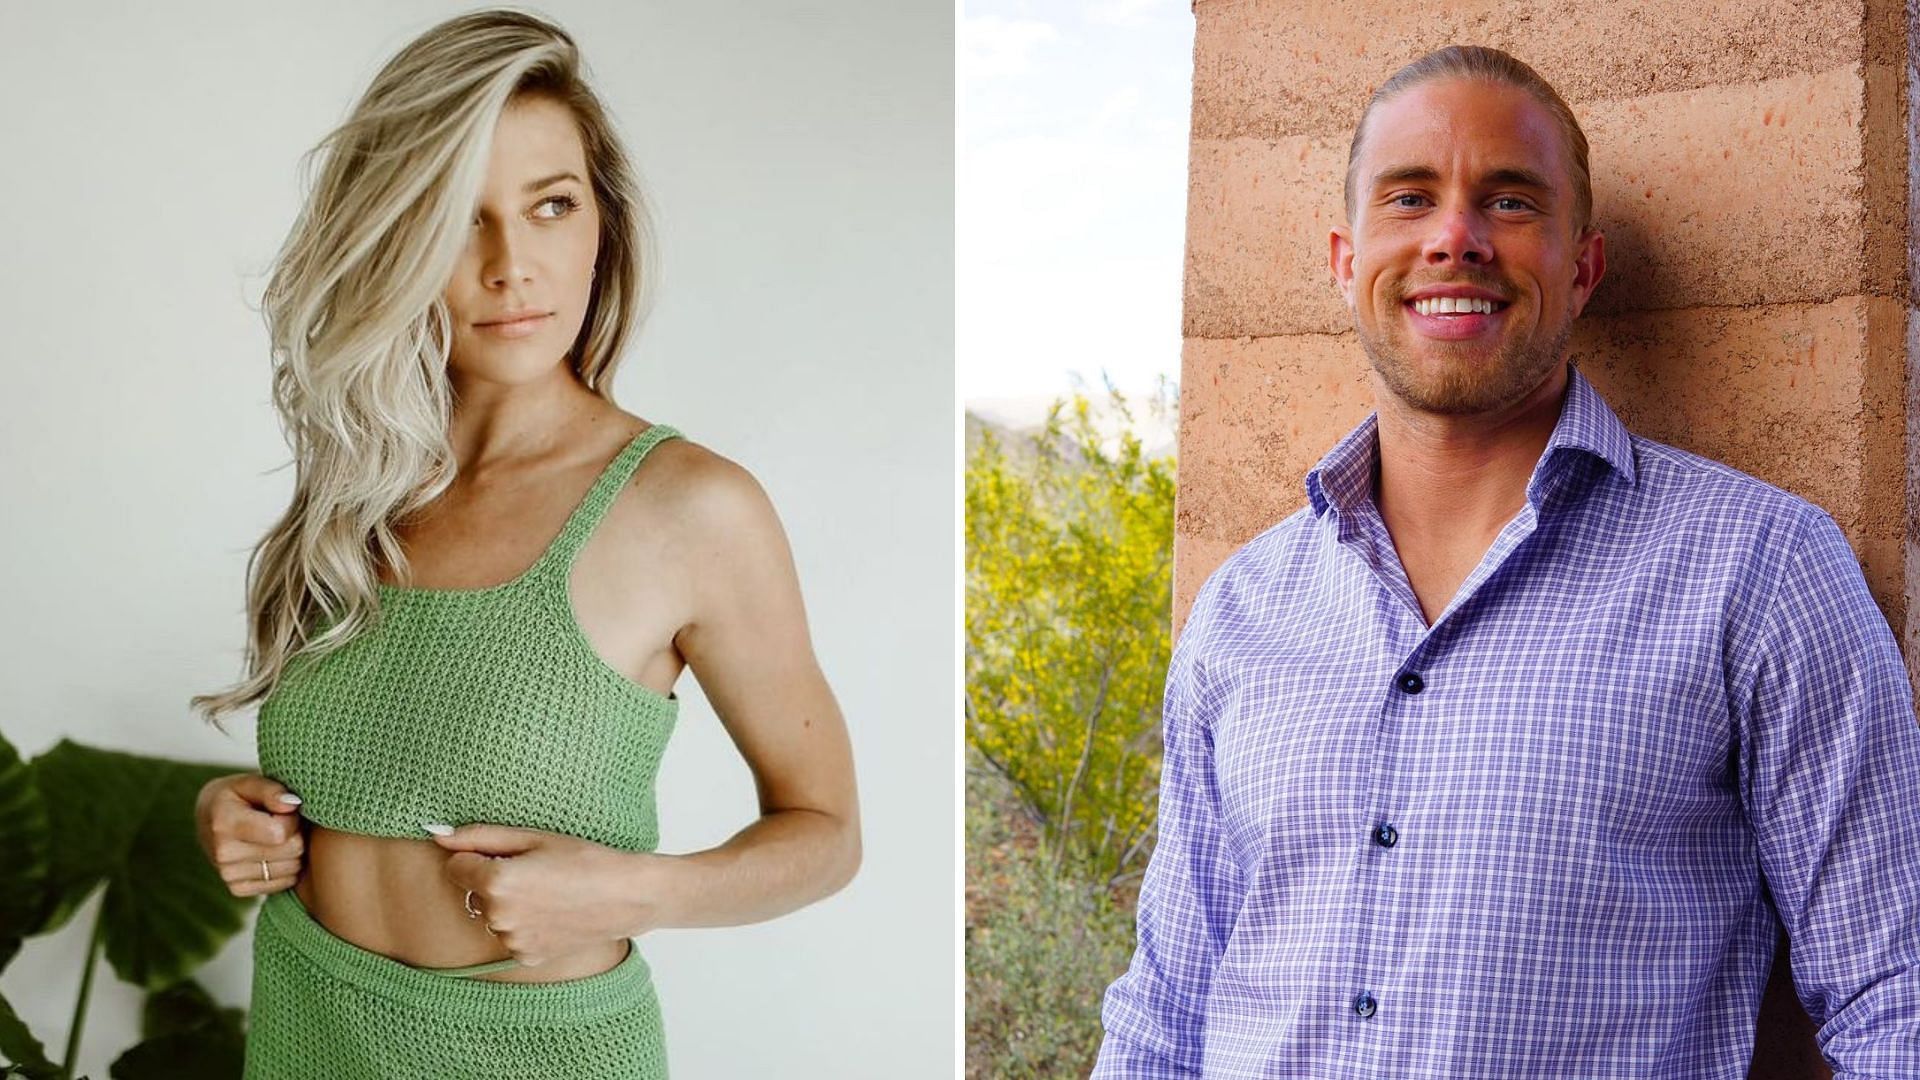 Jacob and Shanae form a connection on Bachelor in Paradise